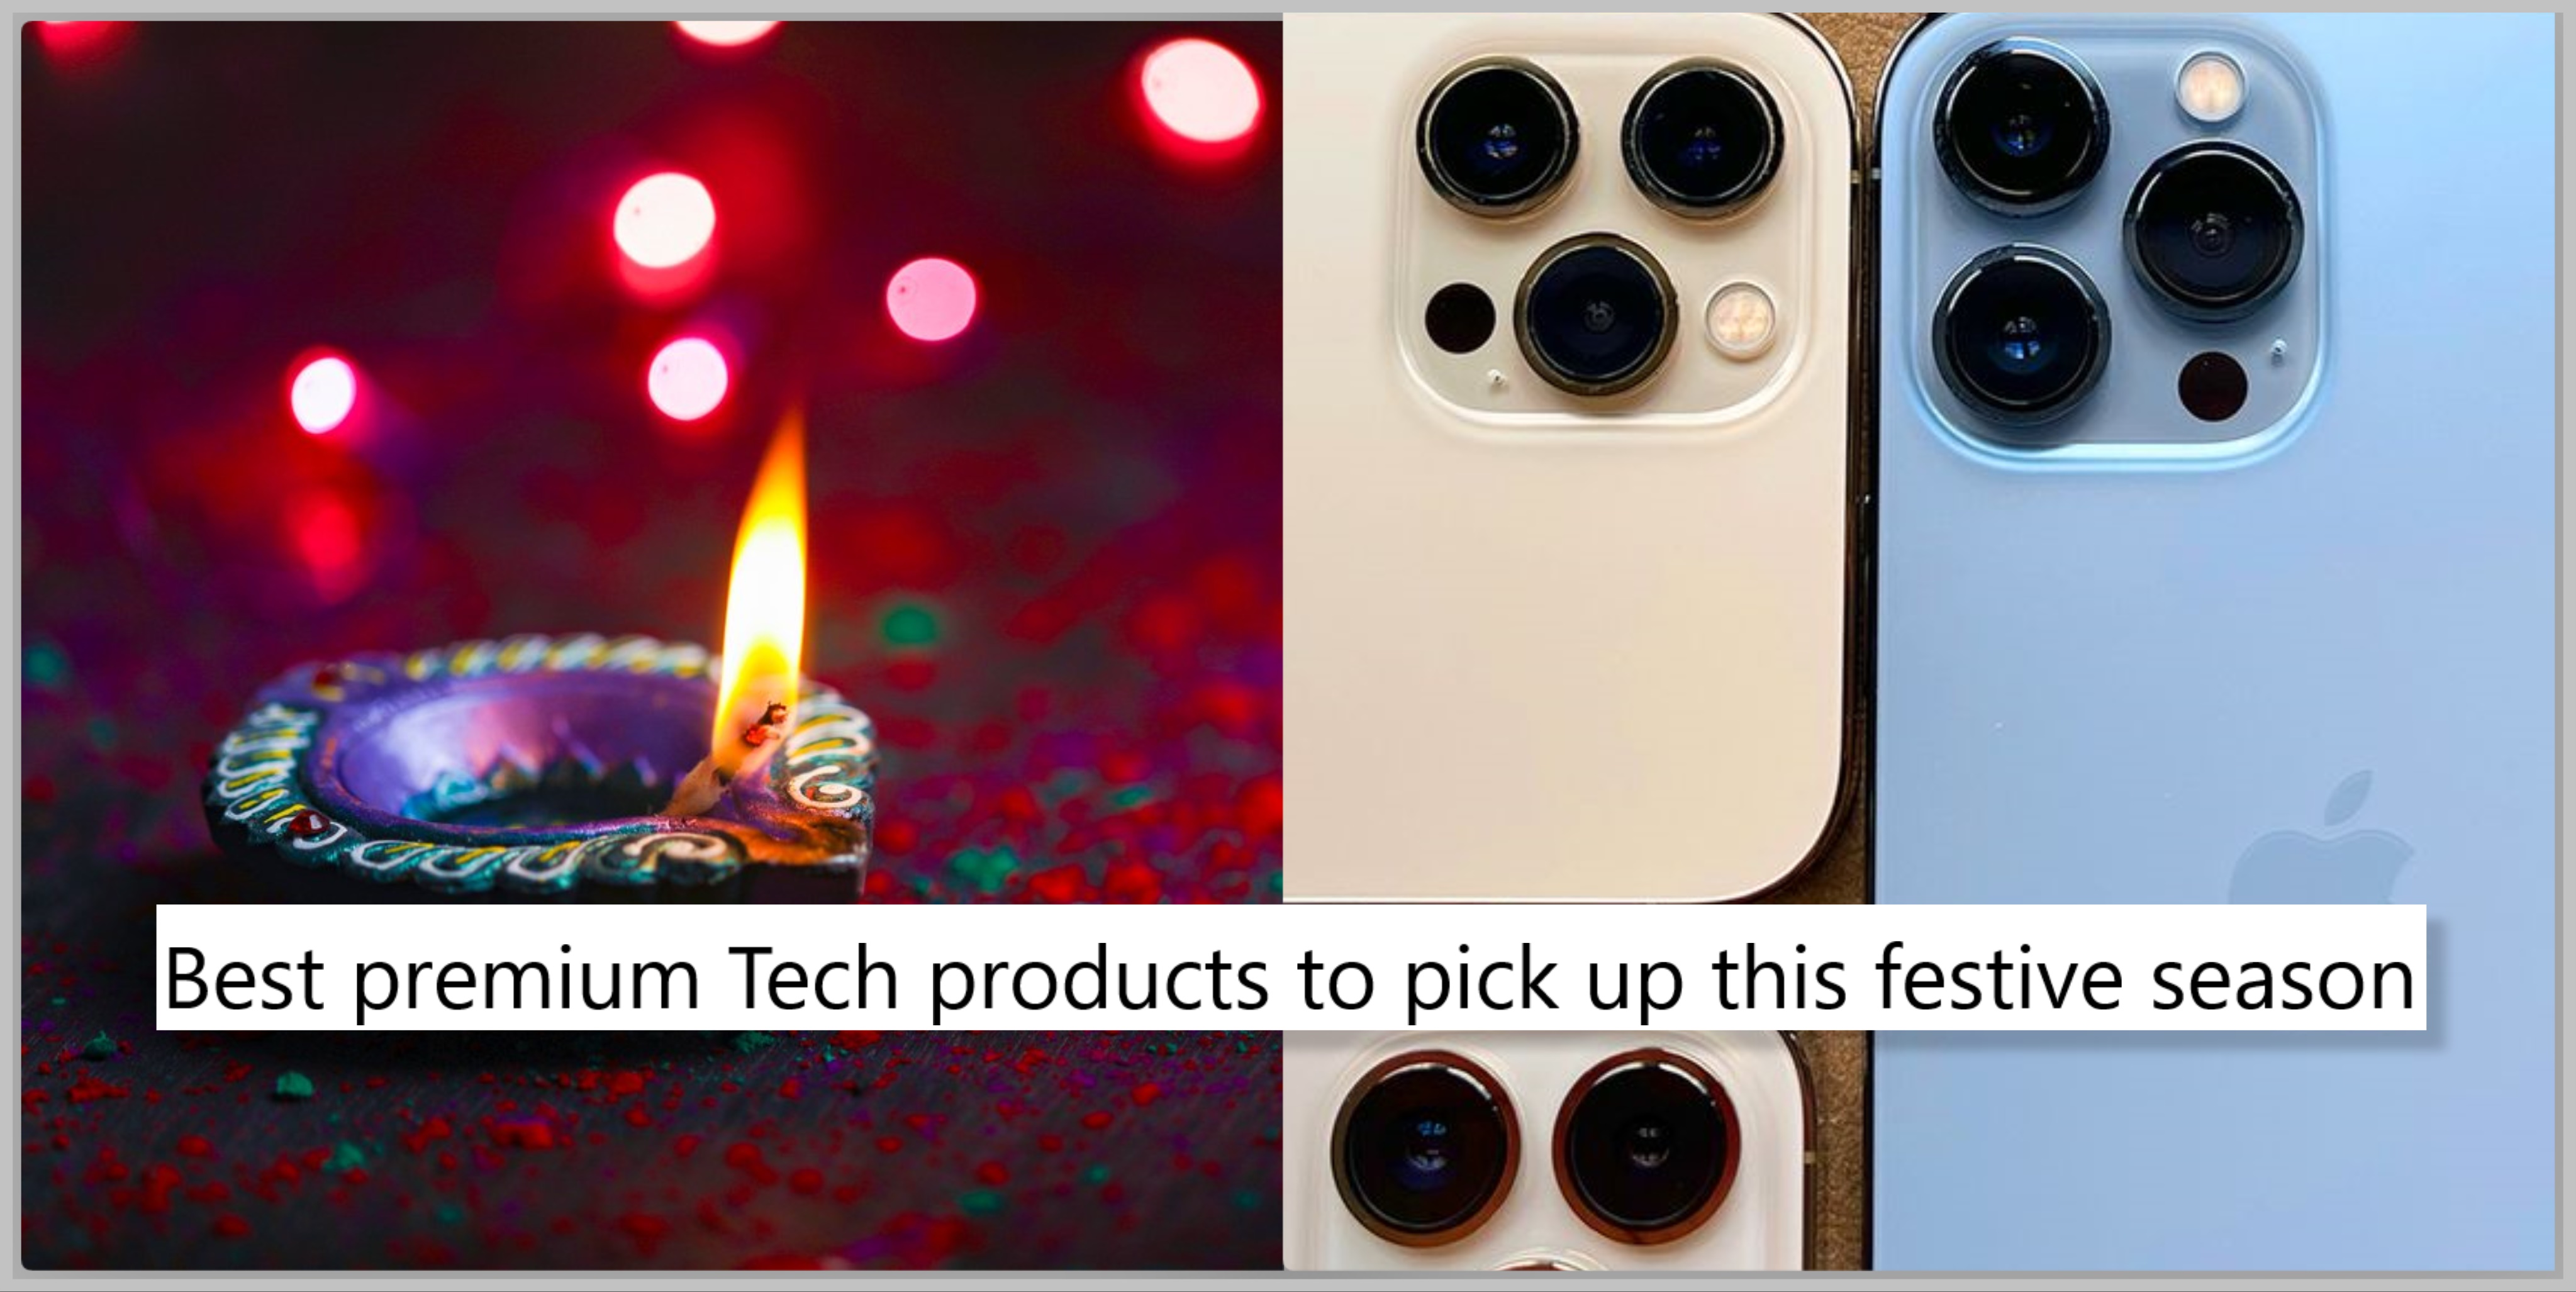 Diwali 2021: Best Premium Tech Products To Pick Up This Festive Season